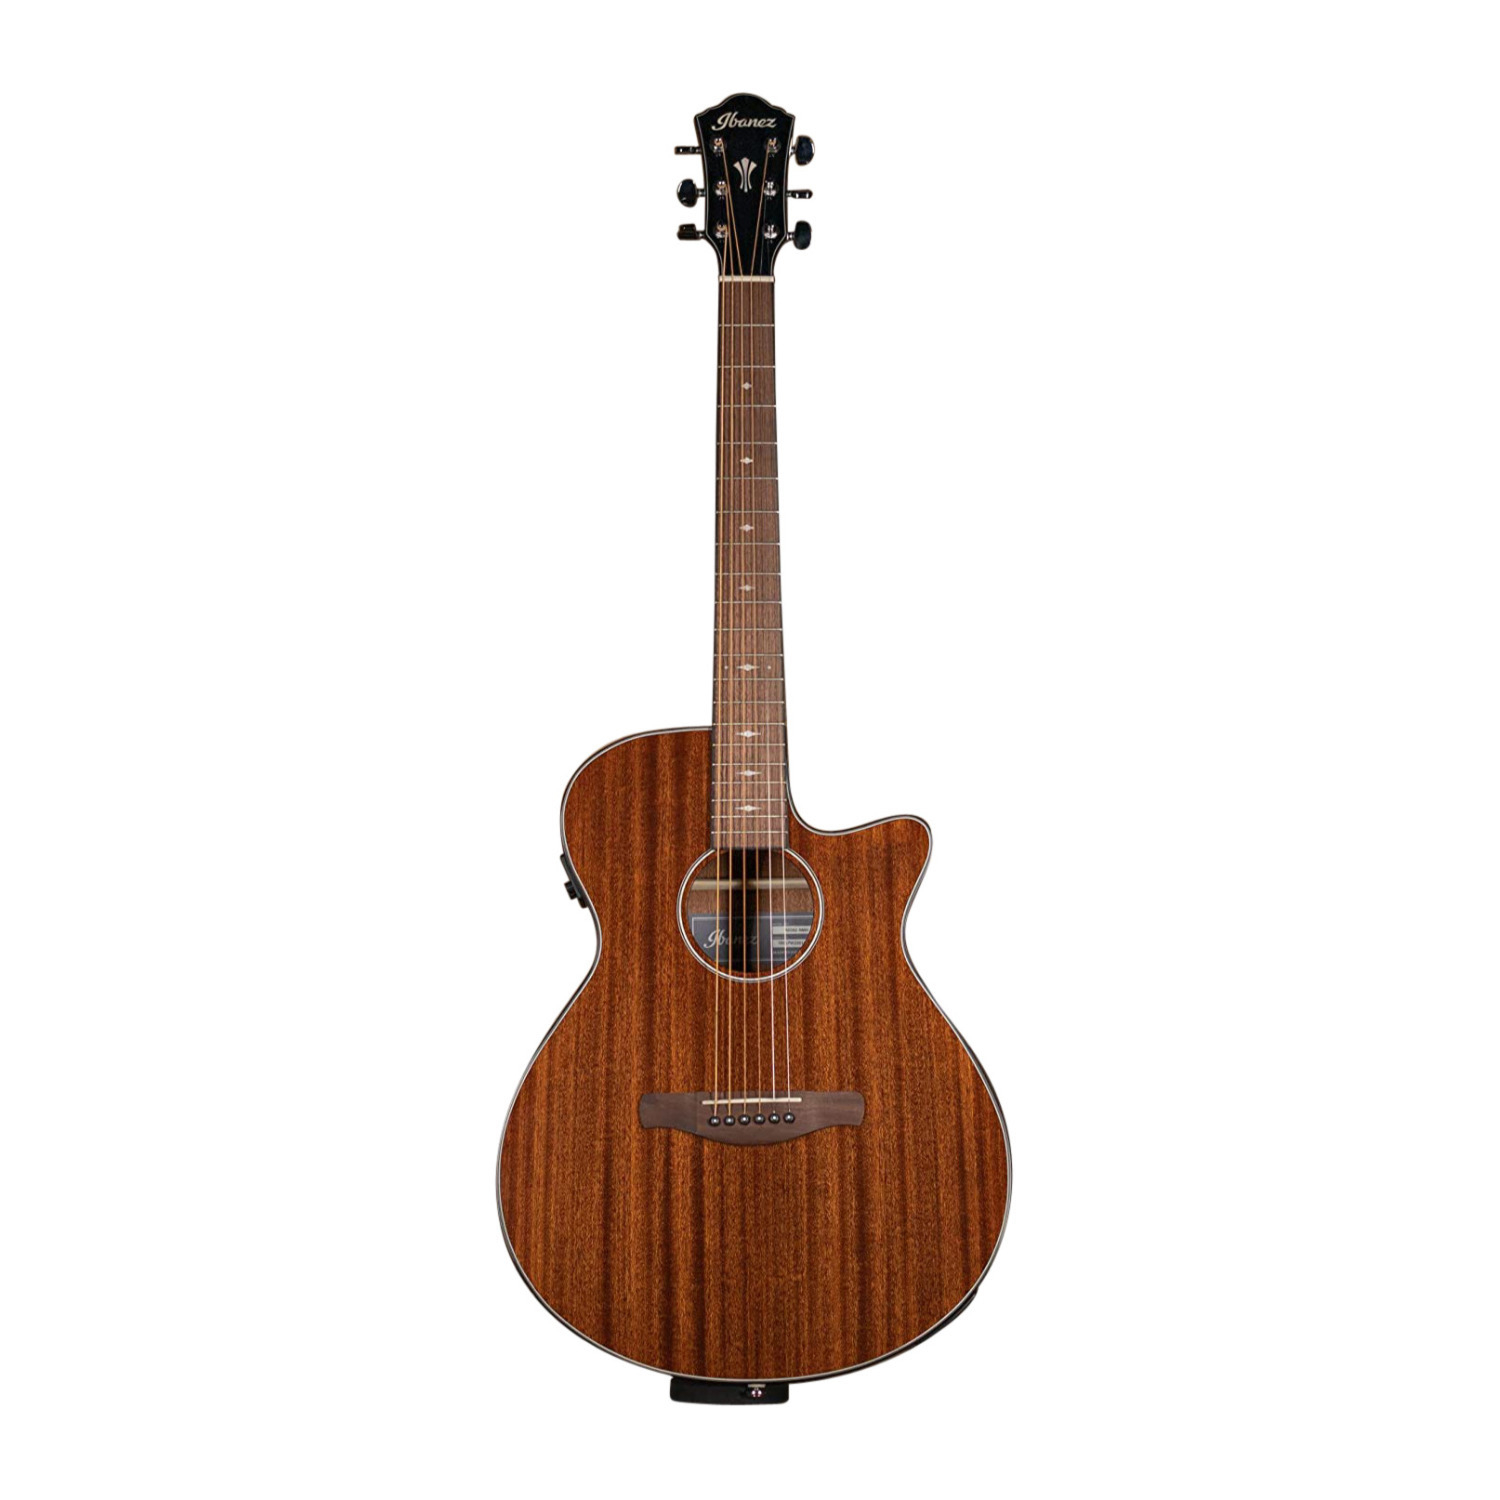 Ibanez AEG62 6-String Acoustic-Electric Guitar (Right Hand, Natural Mahogany High Gloss) in Brown -  AEG62NMH